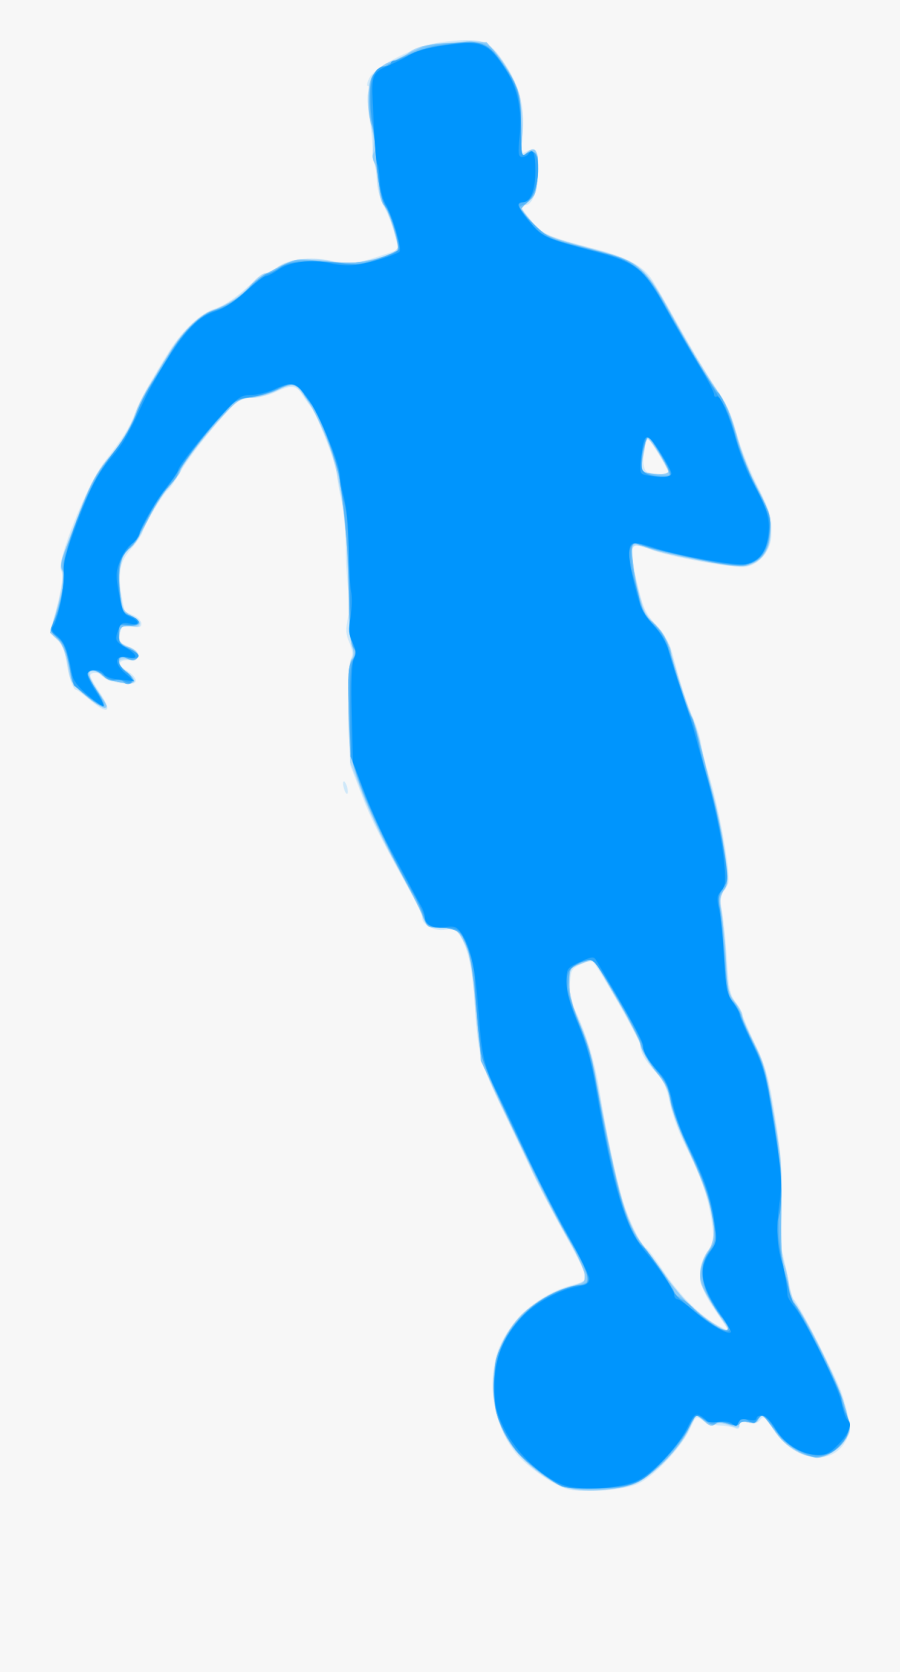 Referee Clipart Football Referee, Transparent Clipart